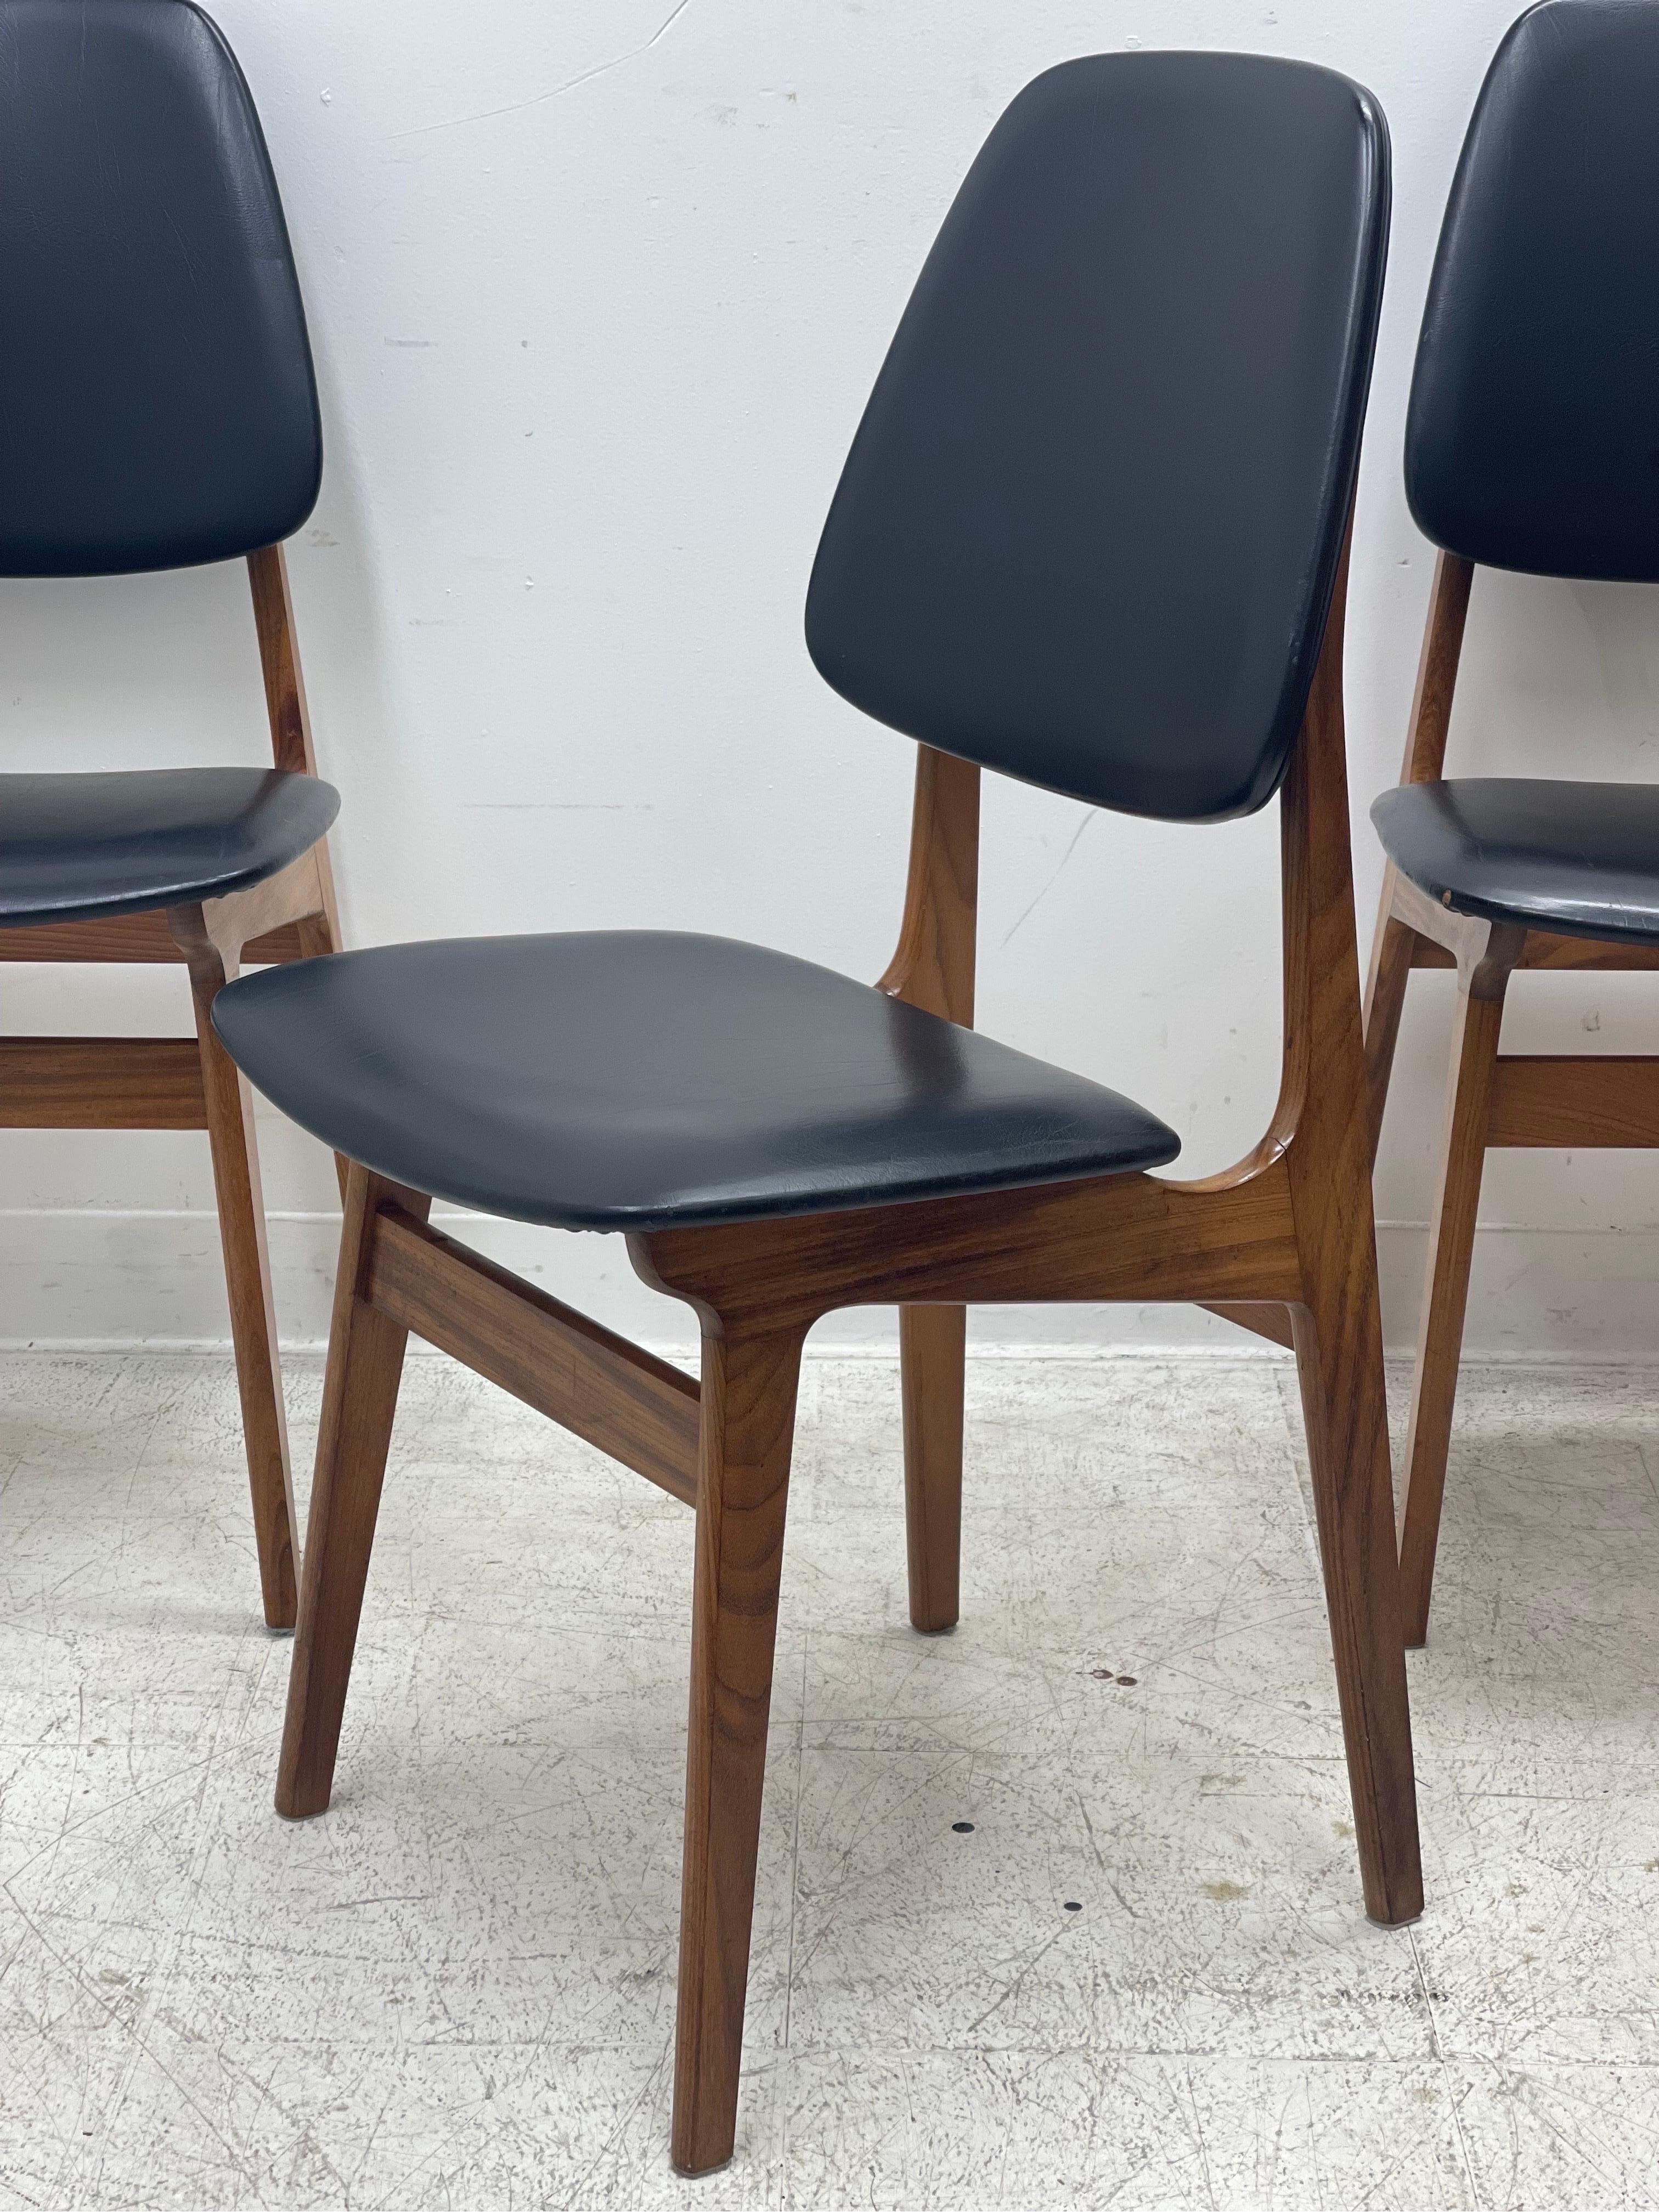 Wood Vintage Danish Modern Chairs Set of 4 For Sale